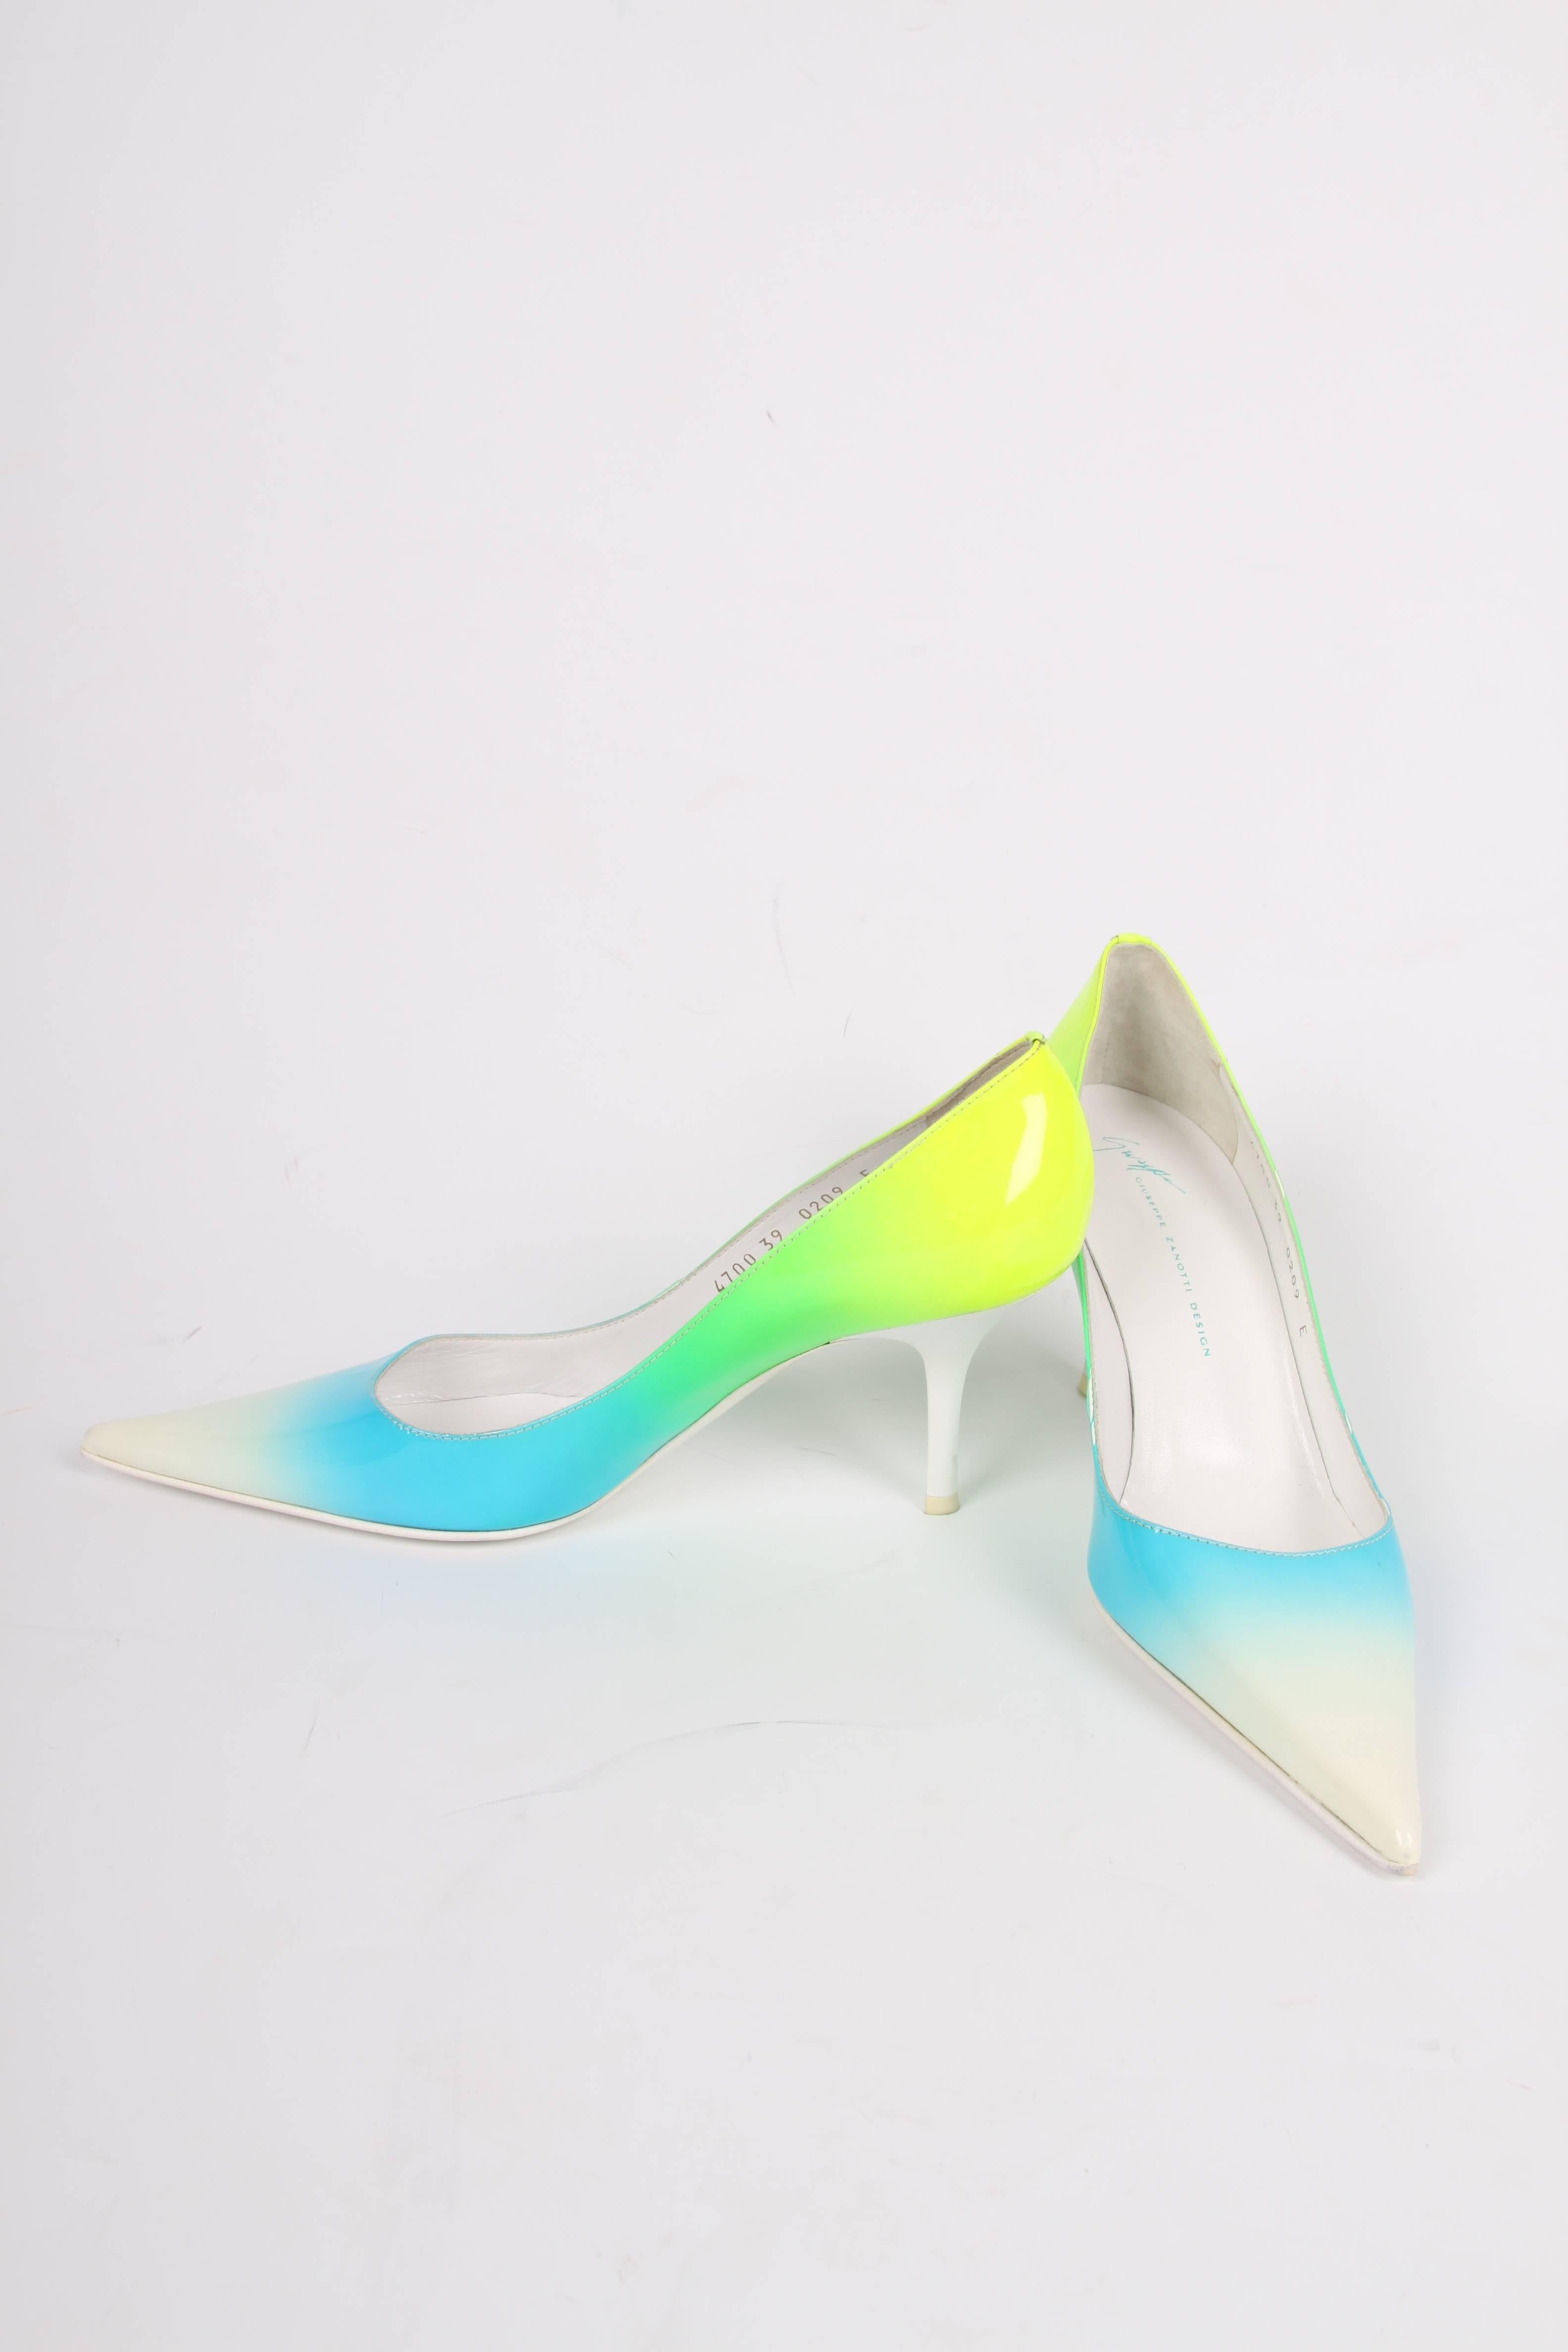 Giuseppe Zanotti Patent Leather Pumps - white/blue/green/yellow In Excellent Condition For Sale In Baarn, NL